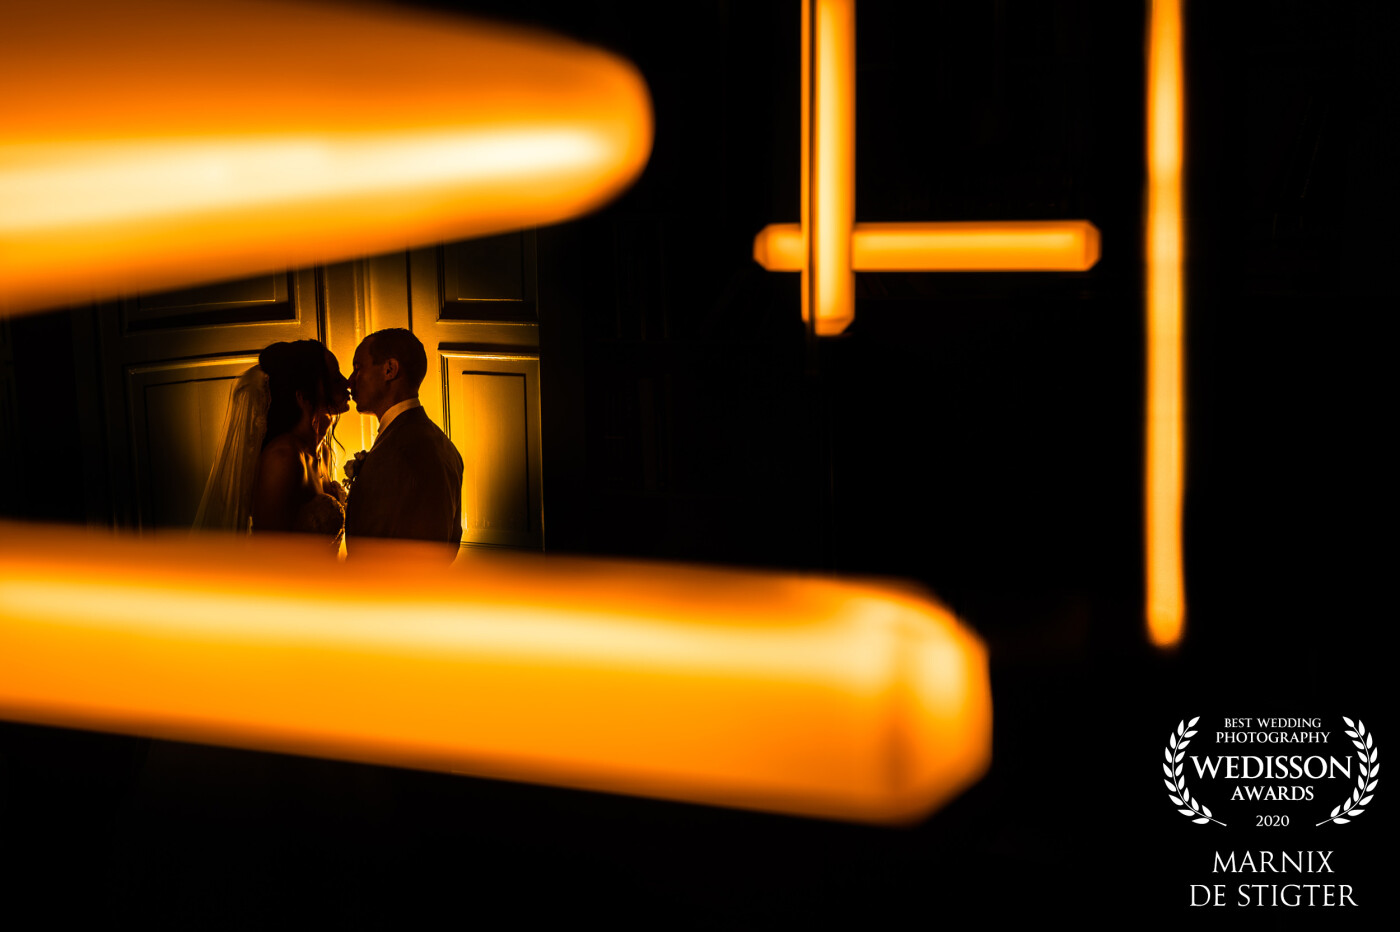 In the old mansion where this couple got married, we found an office with interesting lighting tubes above the table. I instantly knew I wanted to do something with them in an abstract way. I placed the couple with a flash with yellow gel behind them to get this dreamy effect. 